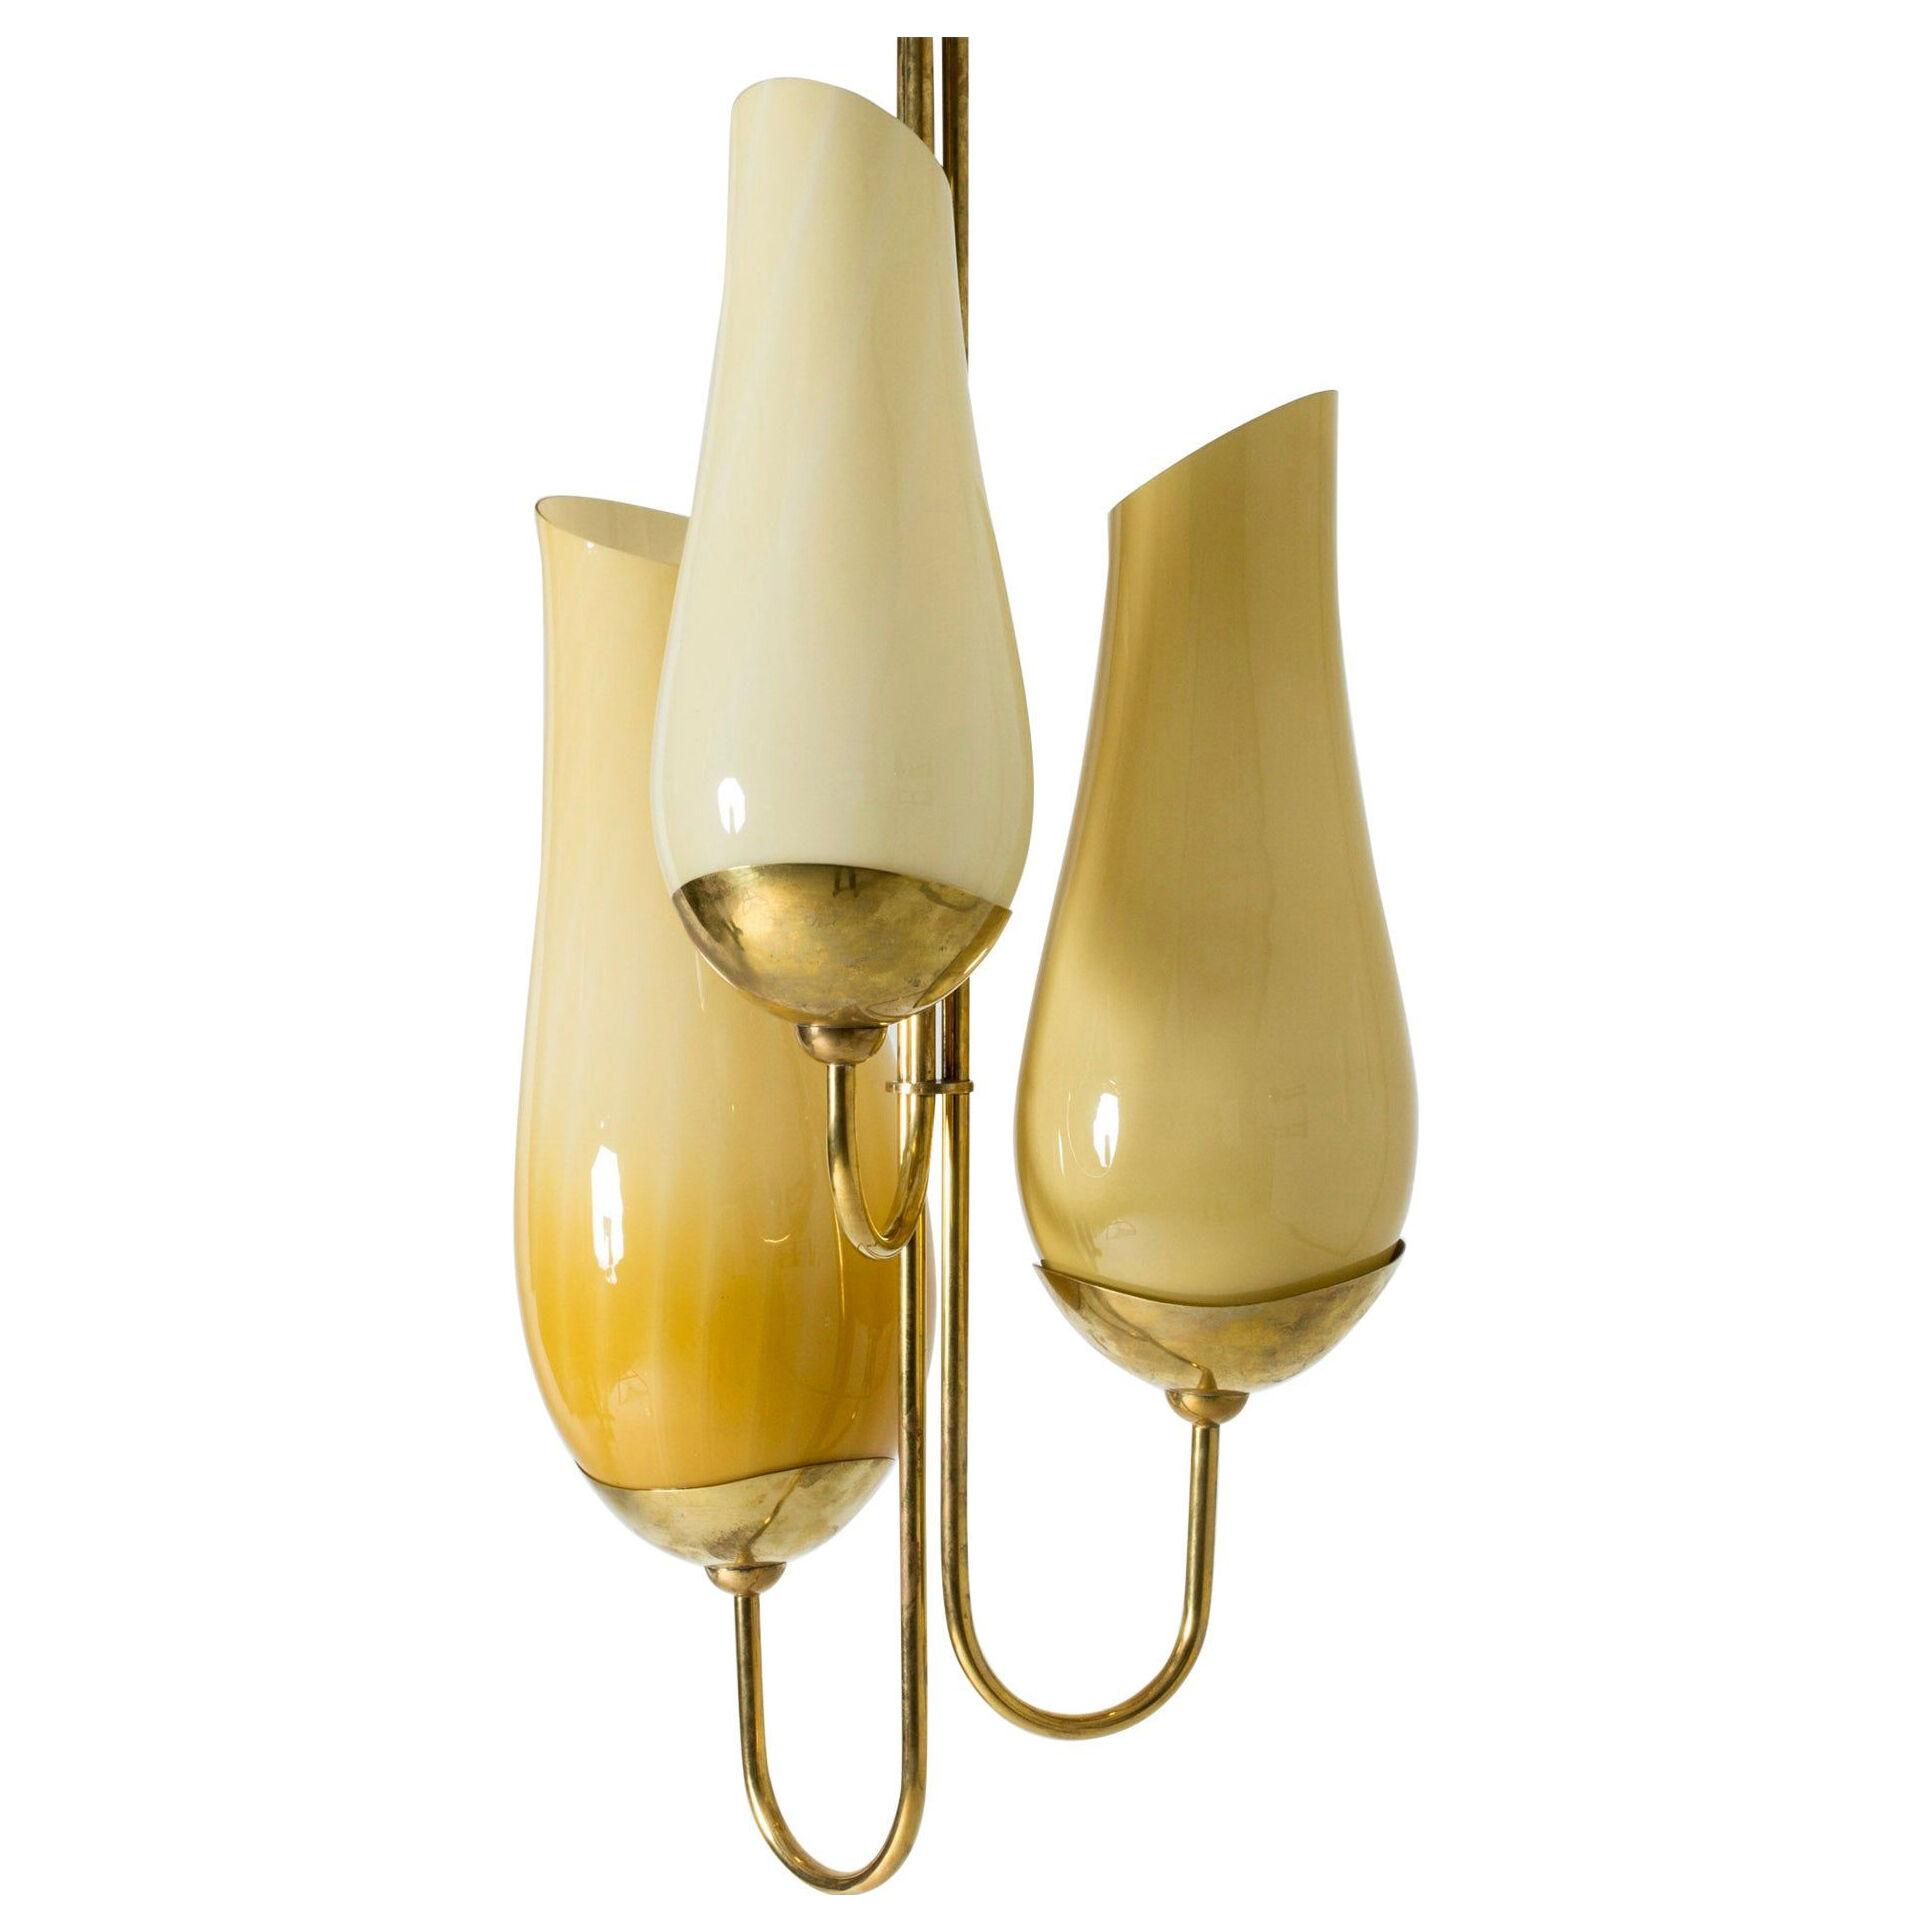 Brass and Glass Cgandelier by Paavo Tynell and Gunnel Nyman for Taito Oy, 1940s